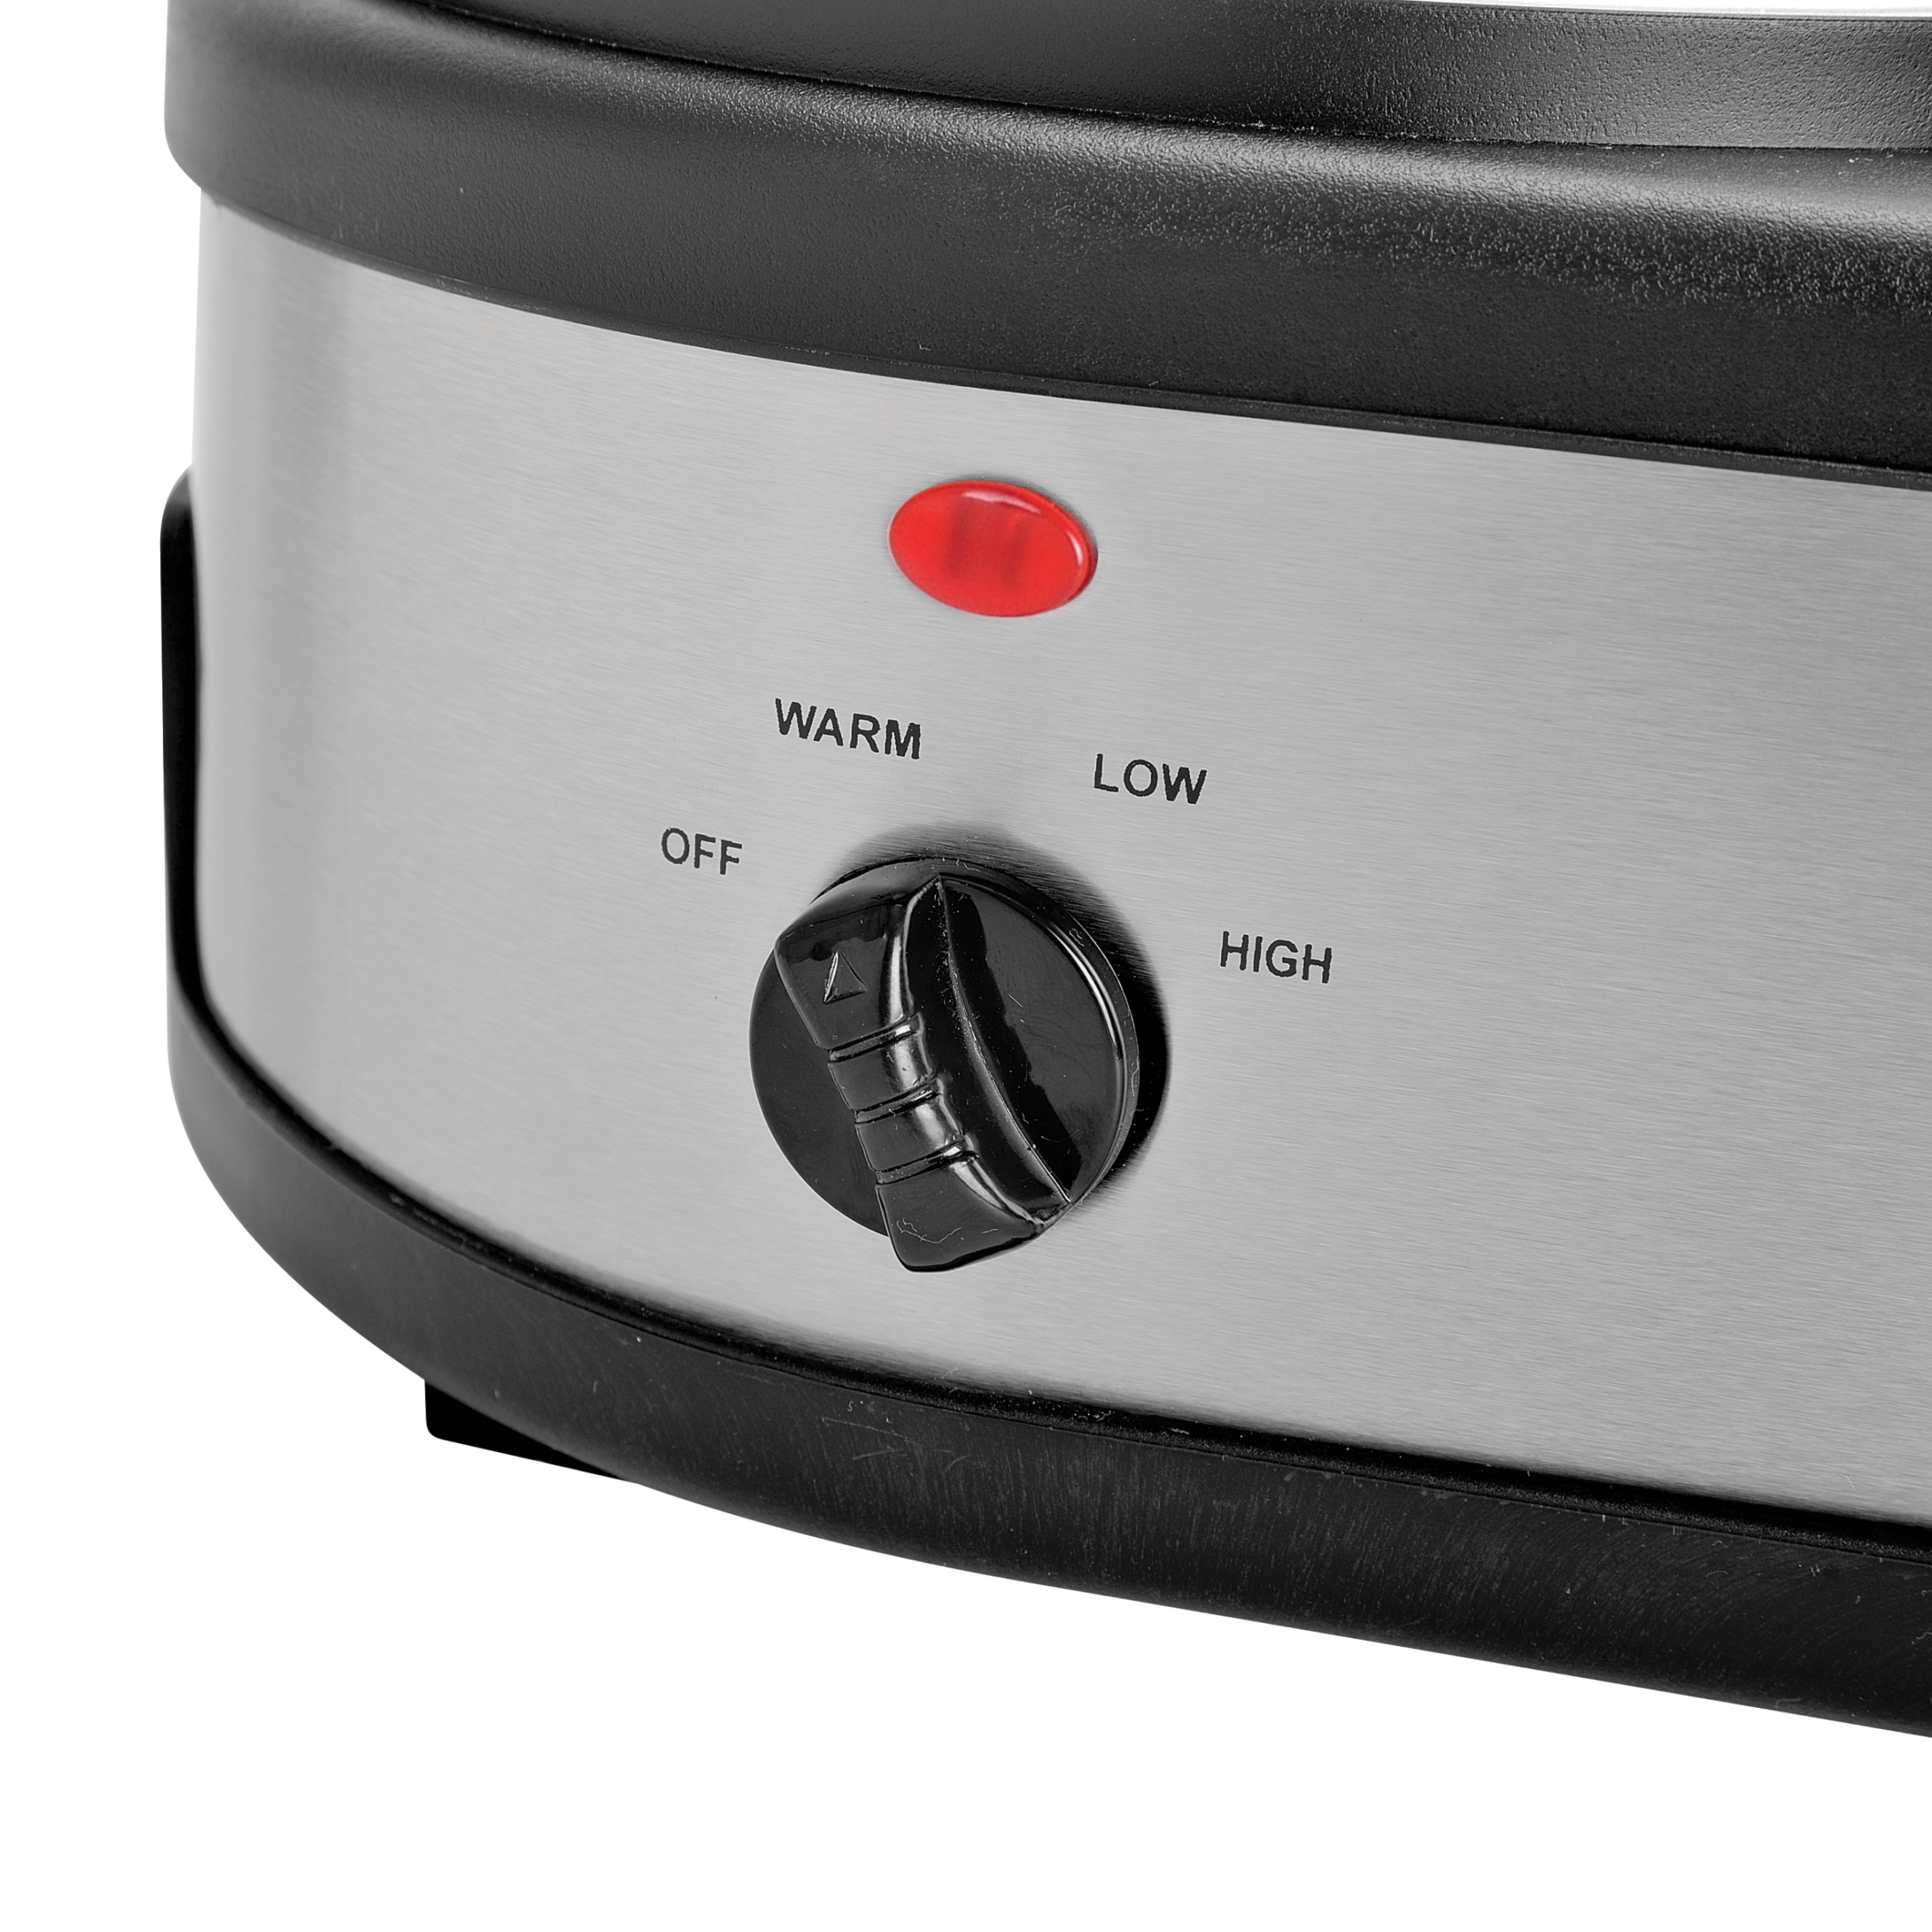 Bergner Supreme Twin Pot Slow Cooker with 1.5 Ltr capacity